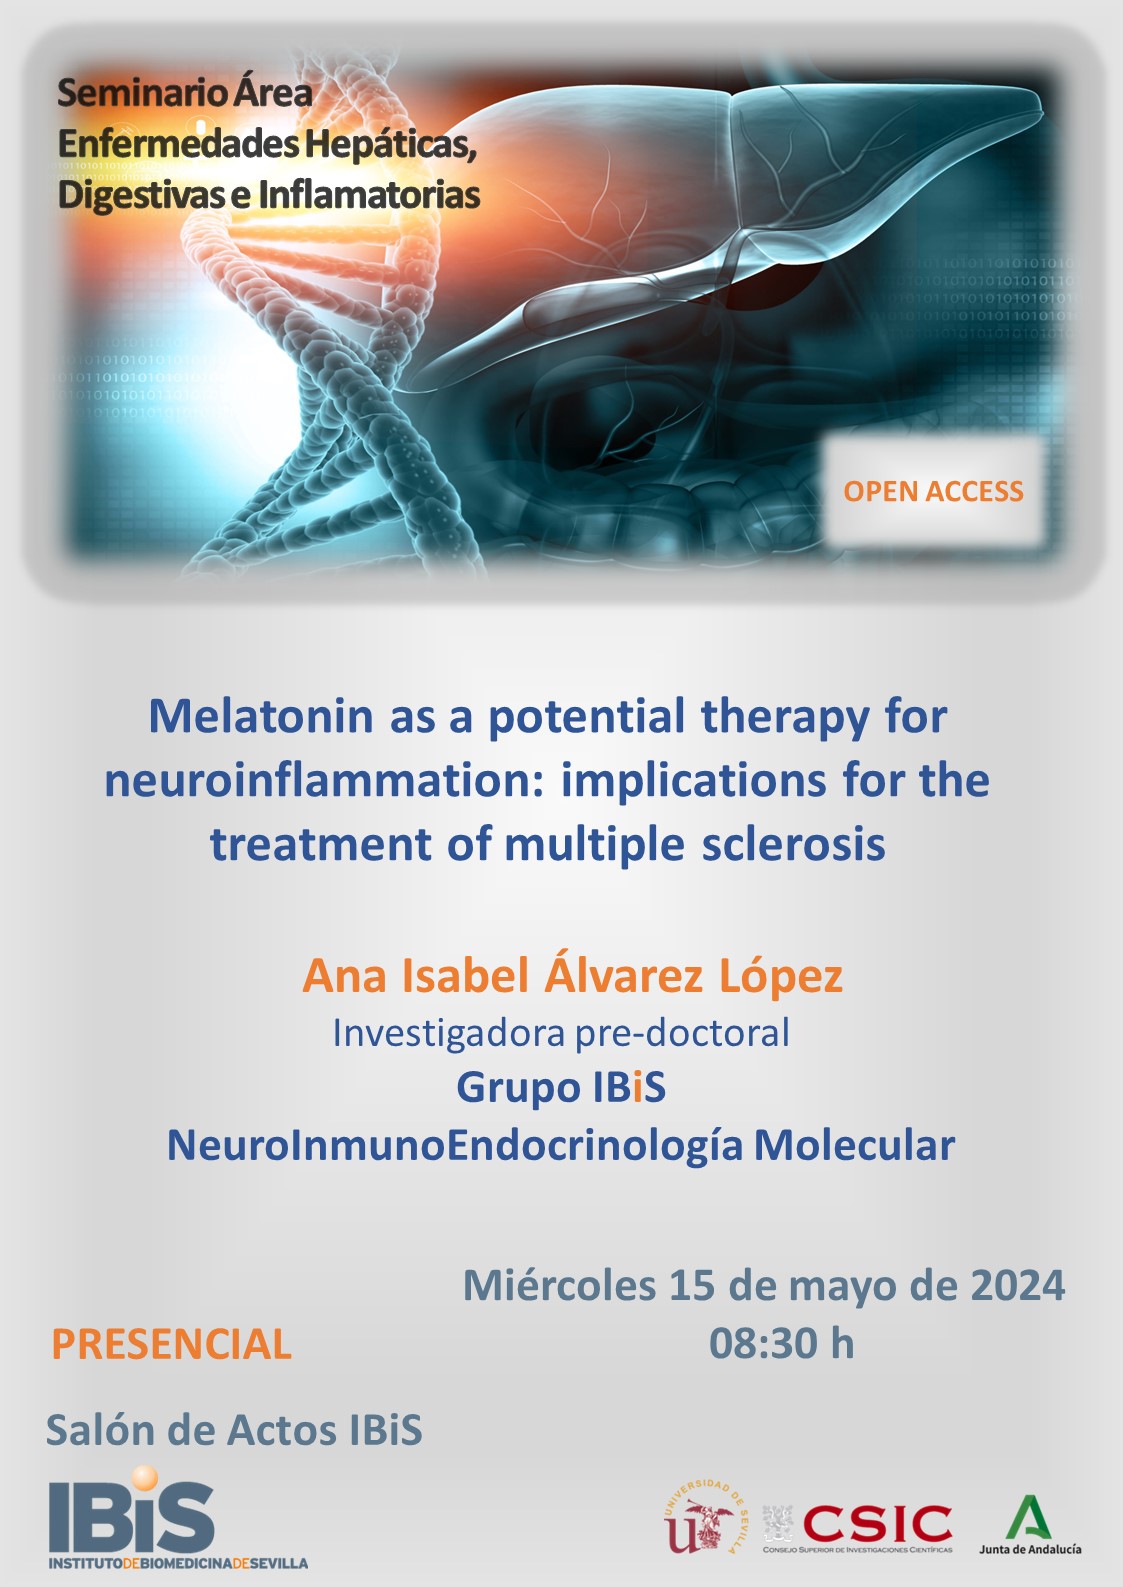 Poster: Melatonin as a potential therapy for neuroinflammation: implications for the treatment of multiple sclerosis